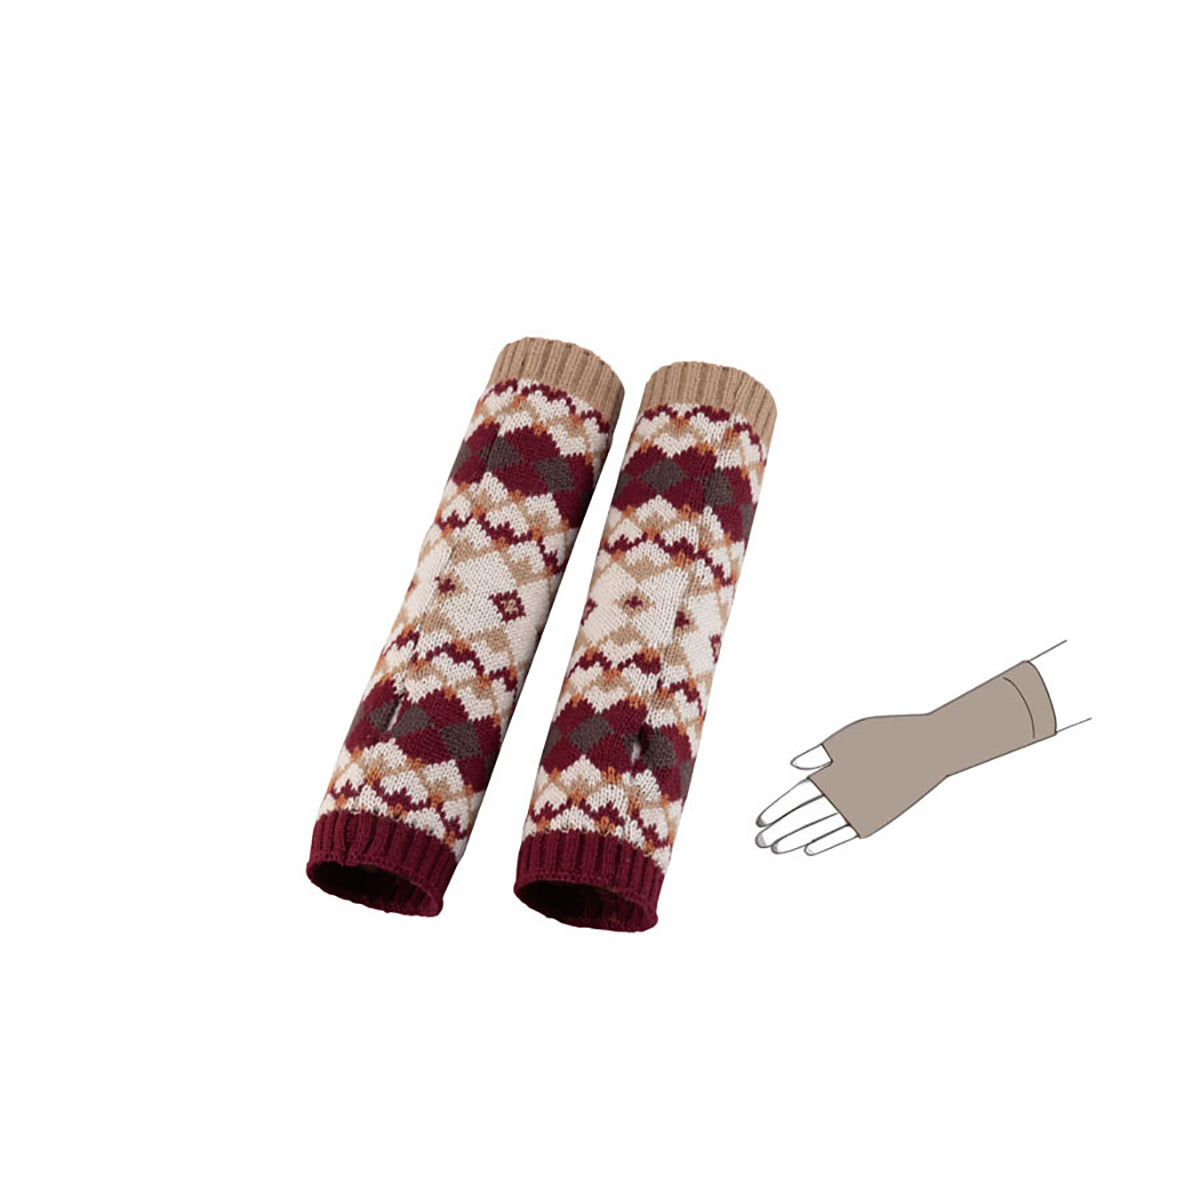 Arm warmers with fingers - EA812